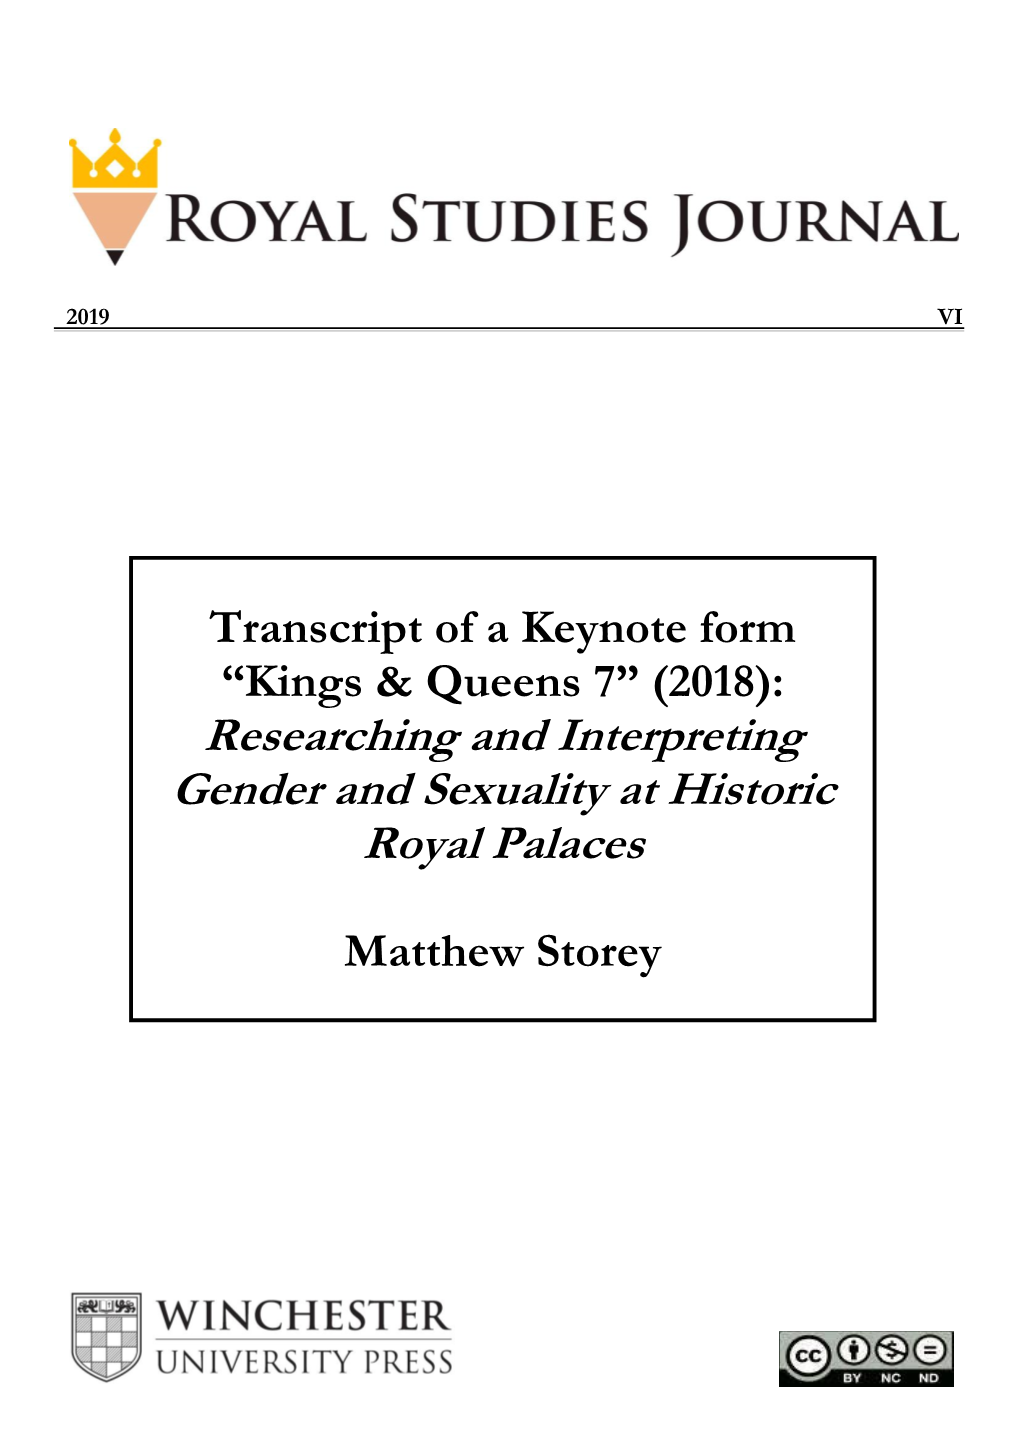 Researching and Interpreting Gender and Sexuality at Historic Royal Palaces